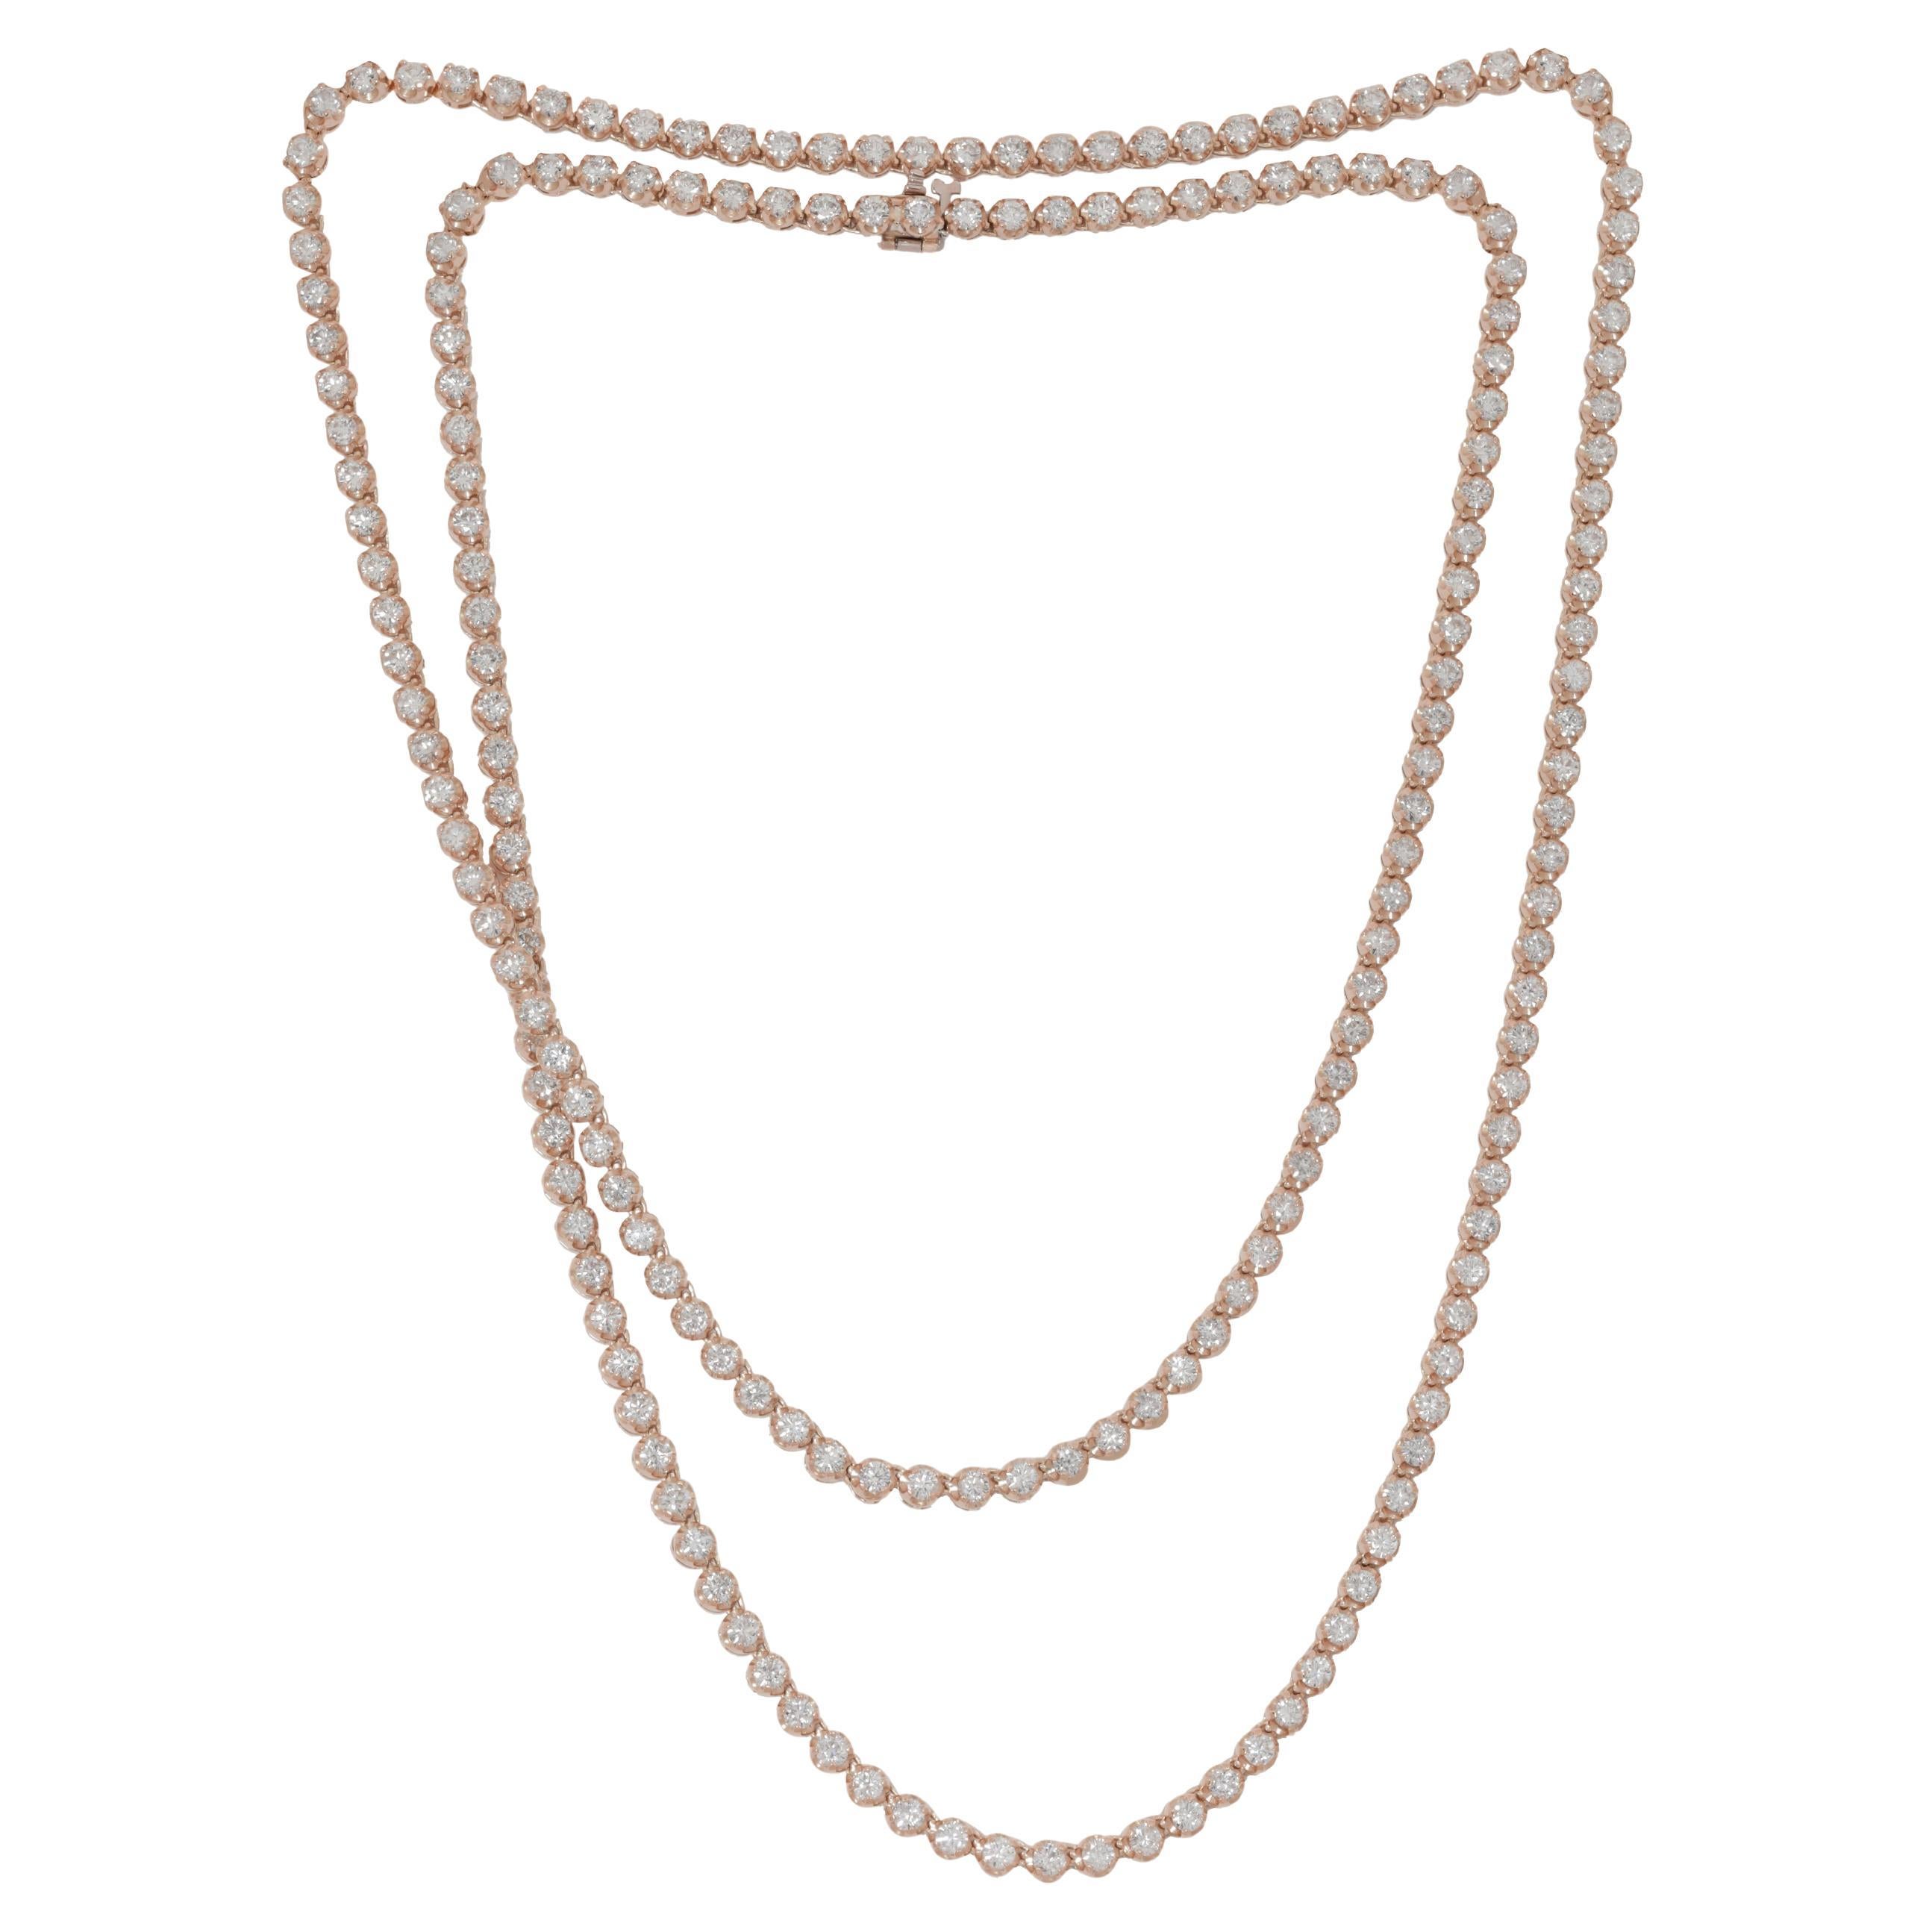 Diana M. Custom 18.20 cts 18k Rose Gold 32" Diamond Tennis Necklace For Sale